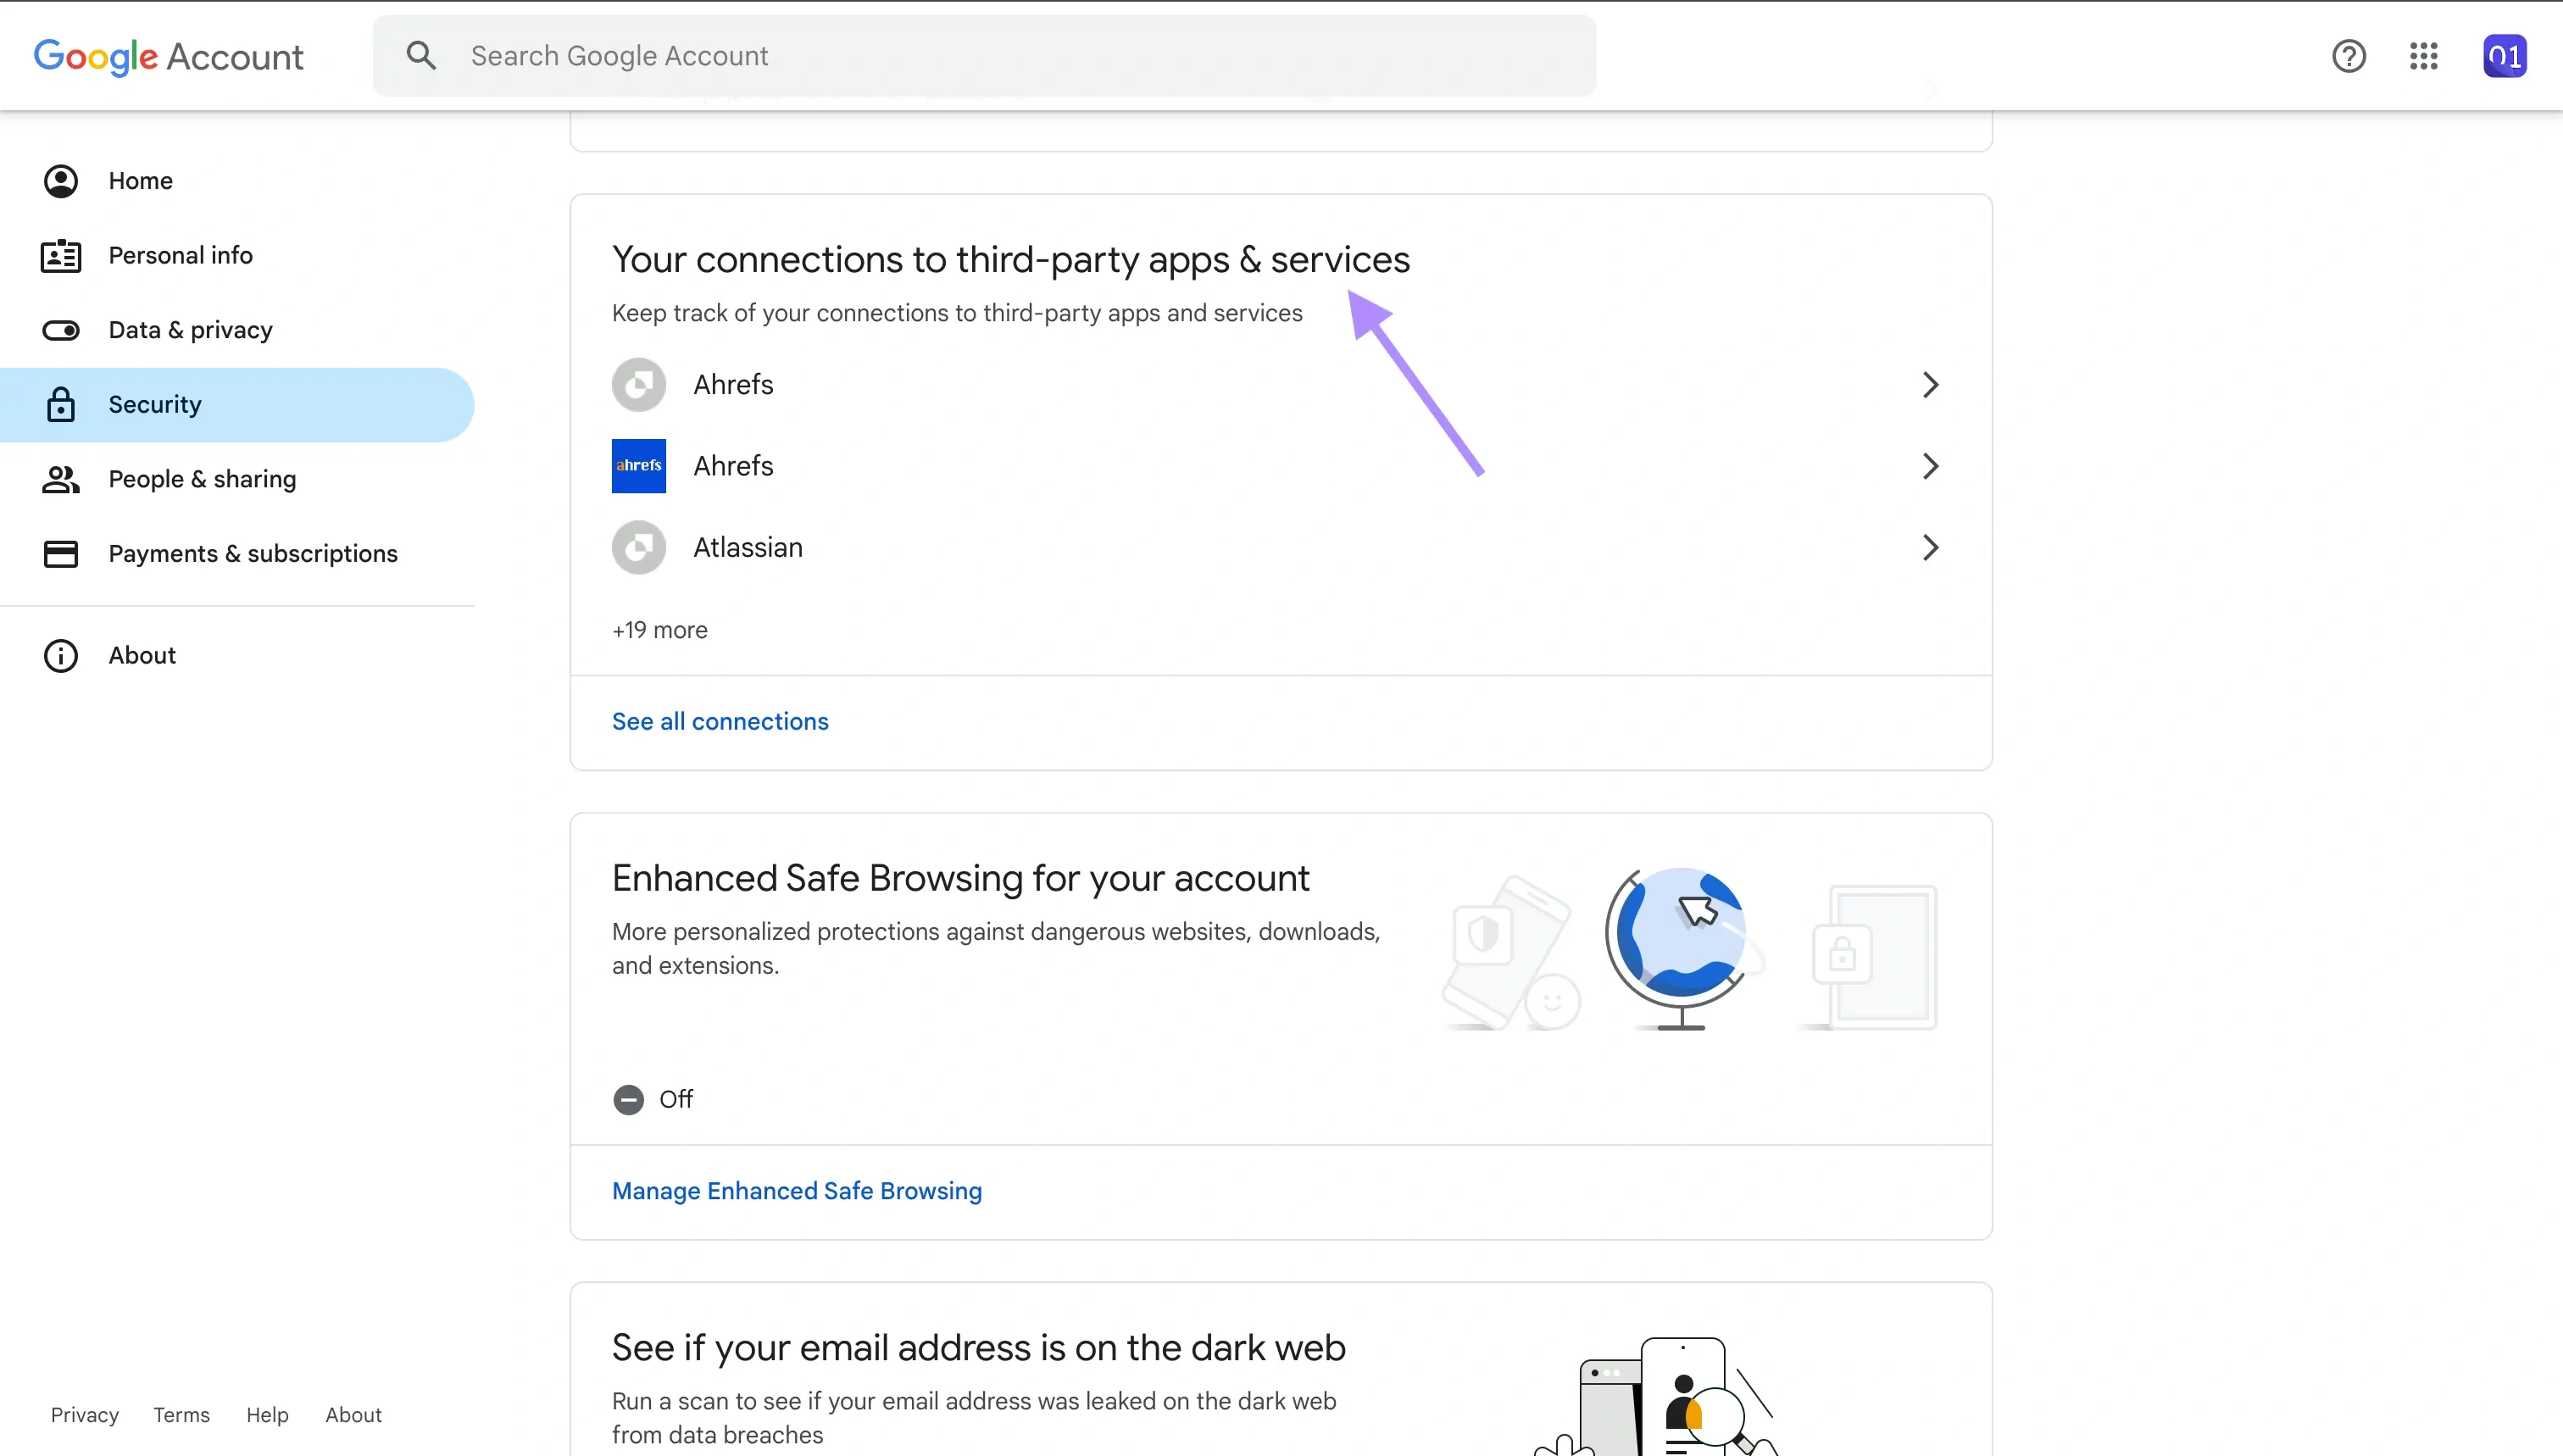 Google Account - Your connections to third-party apps & services